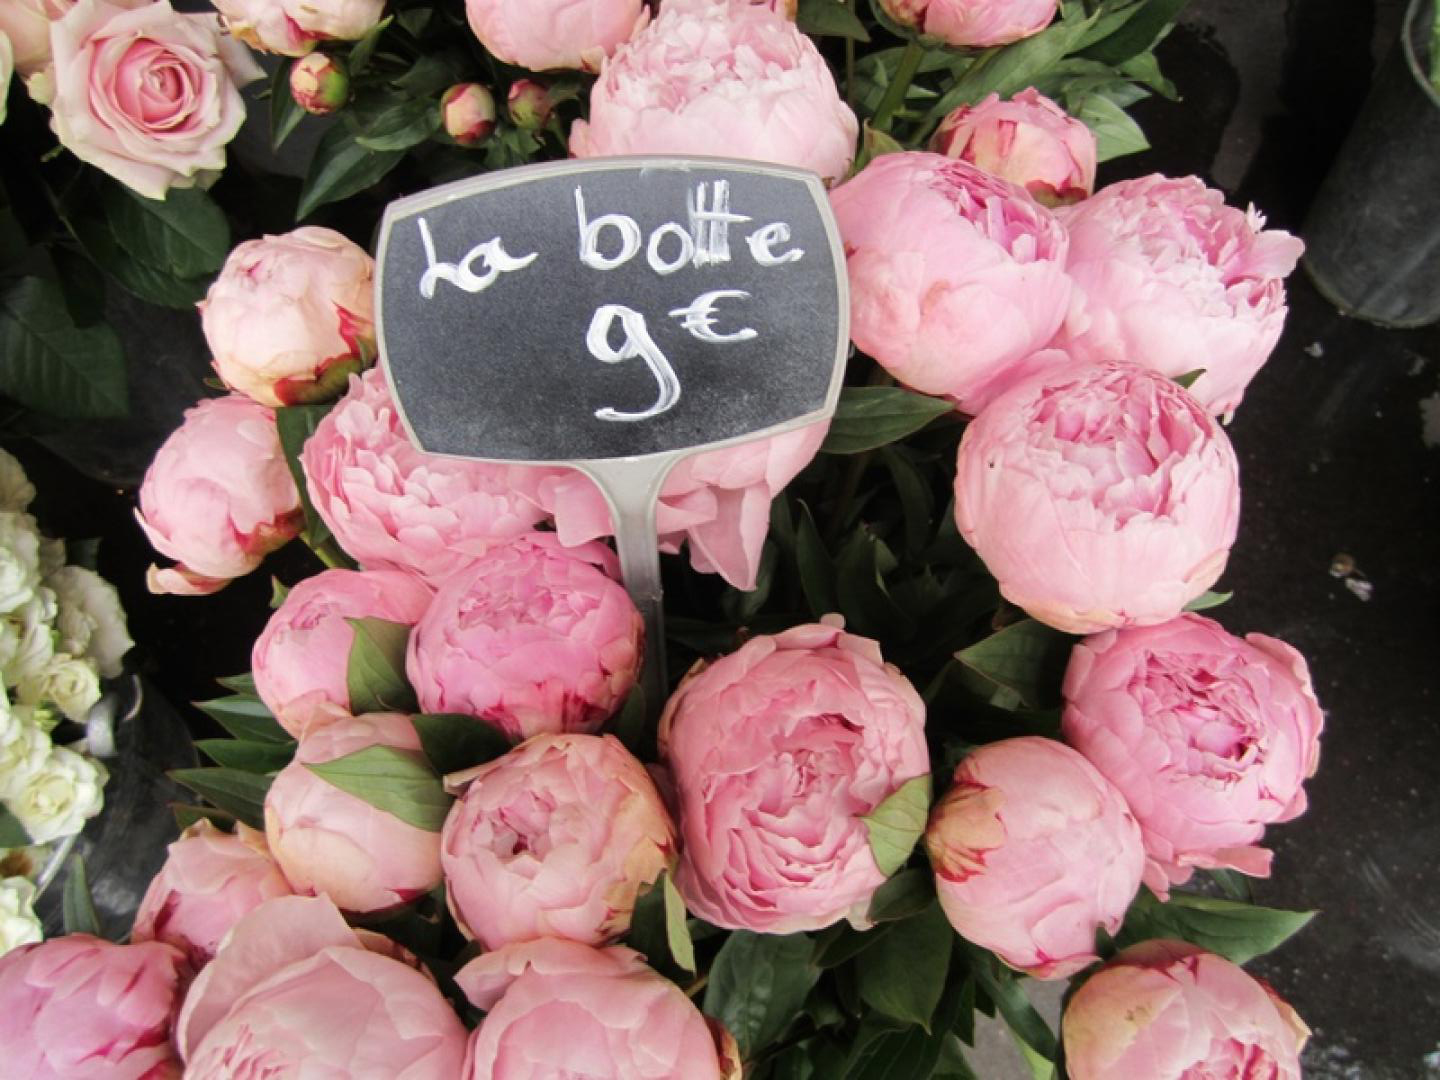 Design Inspiration: Peonies and Flower Markets